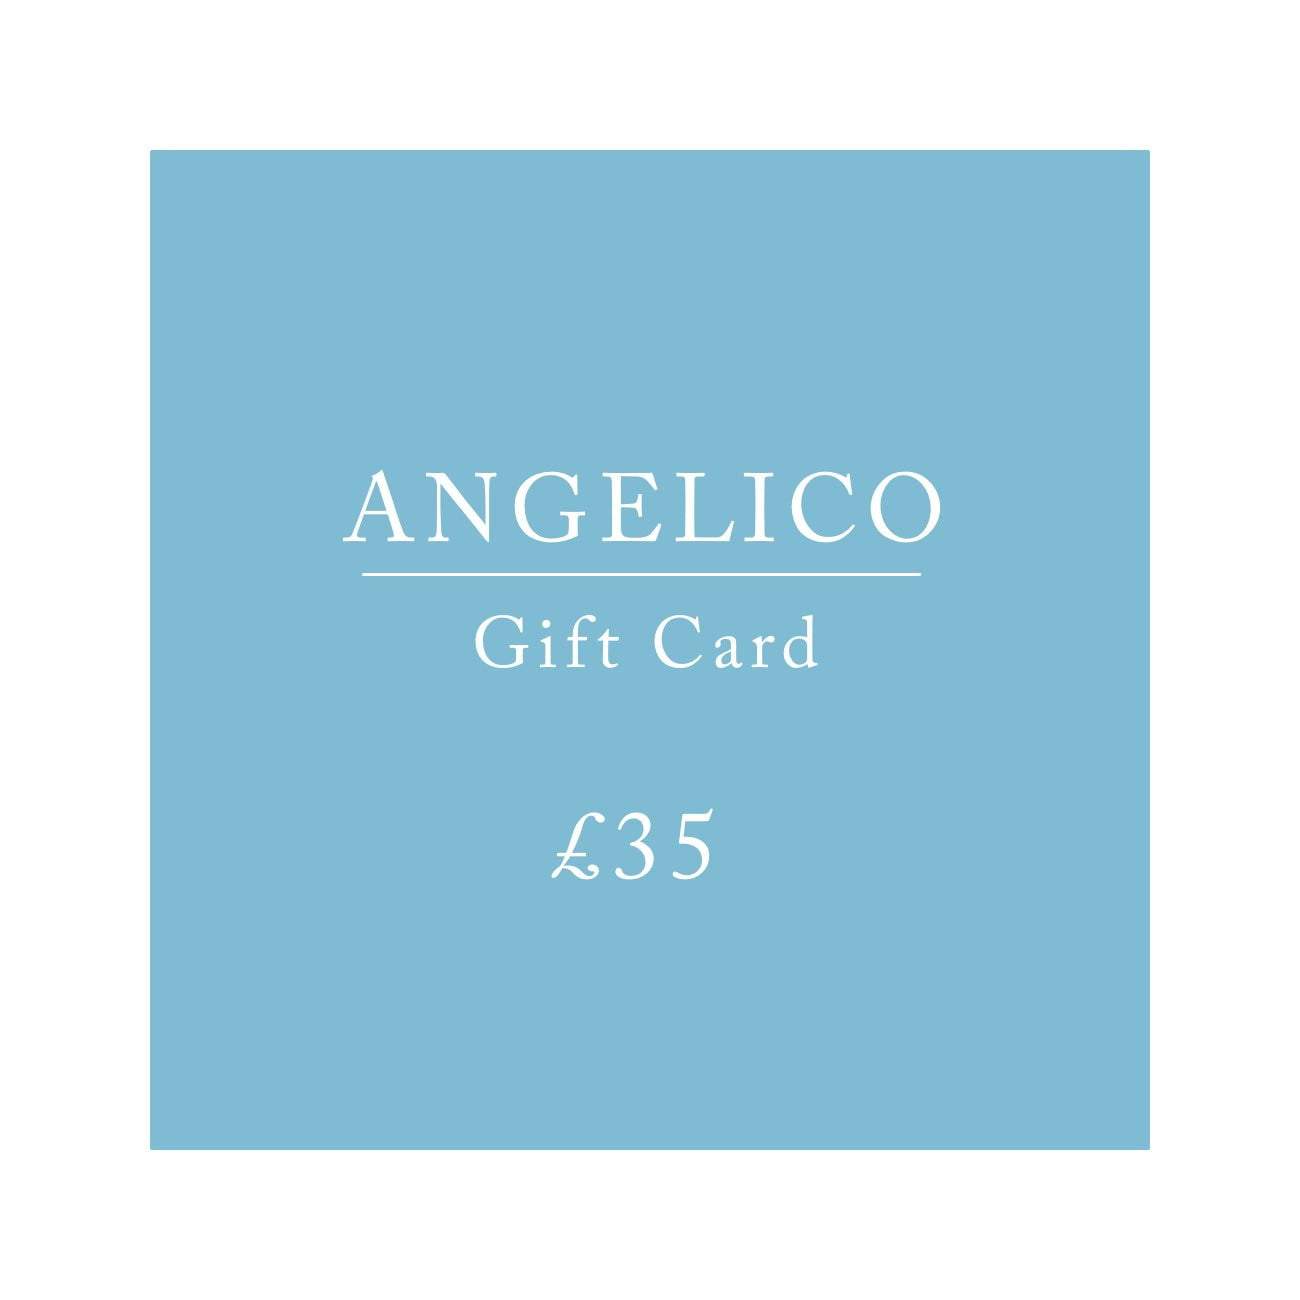 Gift Card - Angelico.London